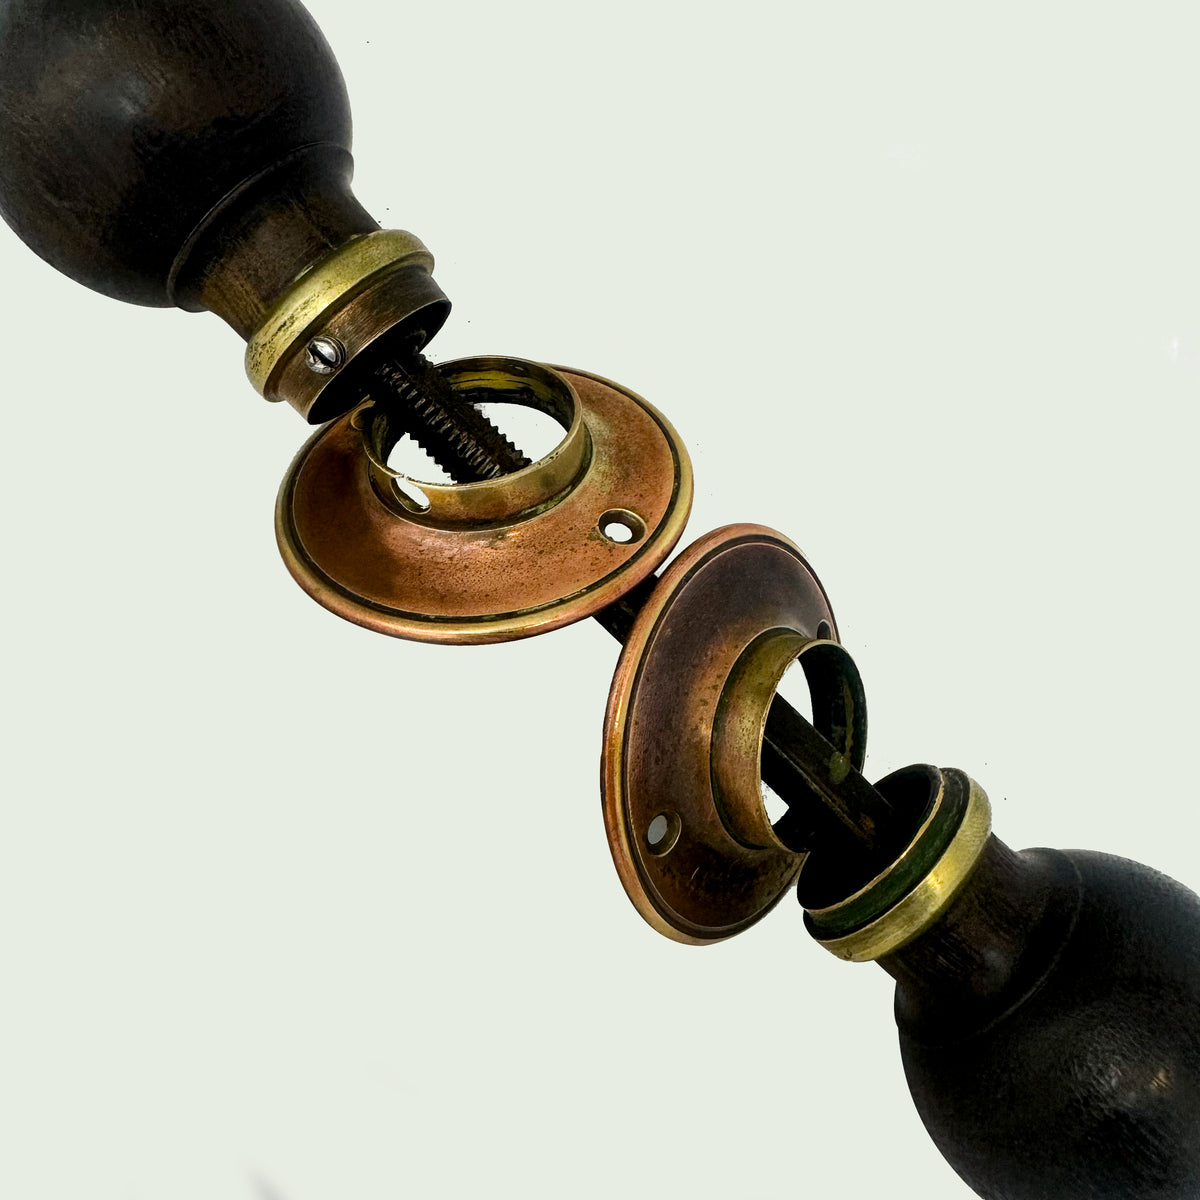 Antique Round Ebony Door Knobs | 2 Pairs Available | The Architectural Forum